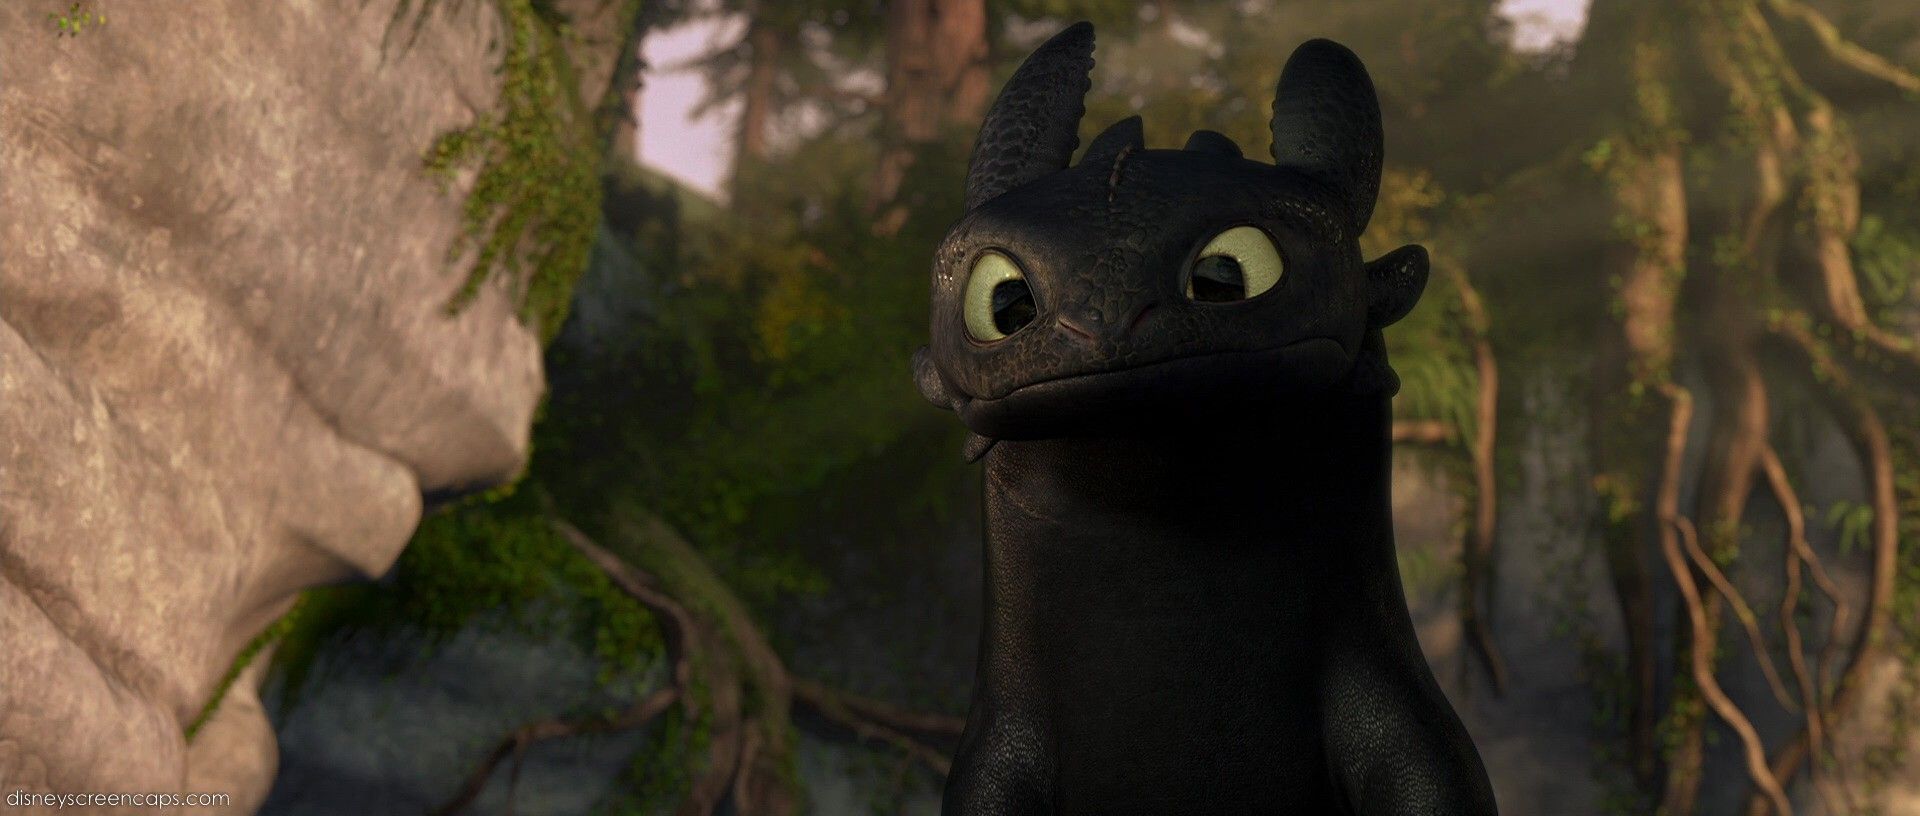 HTTYD2 HD Wallpaper 3: Toothless and Cloudjumper by ...